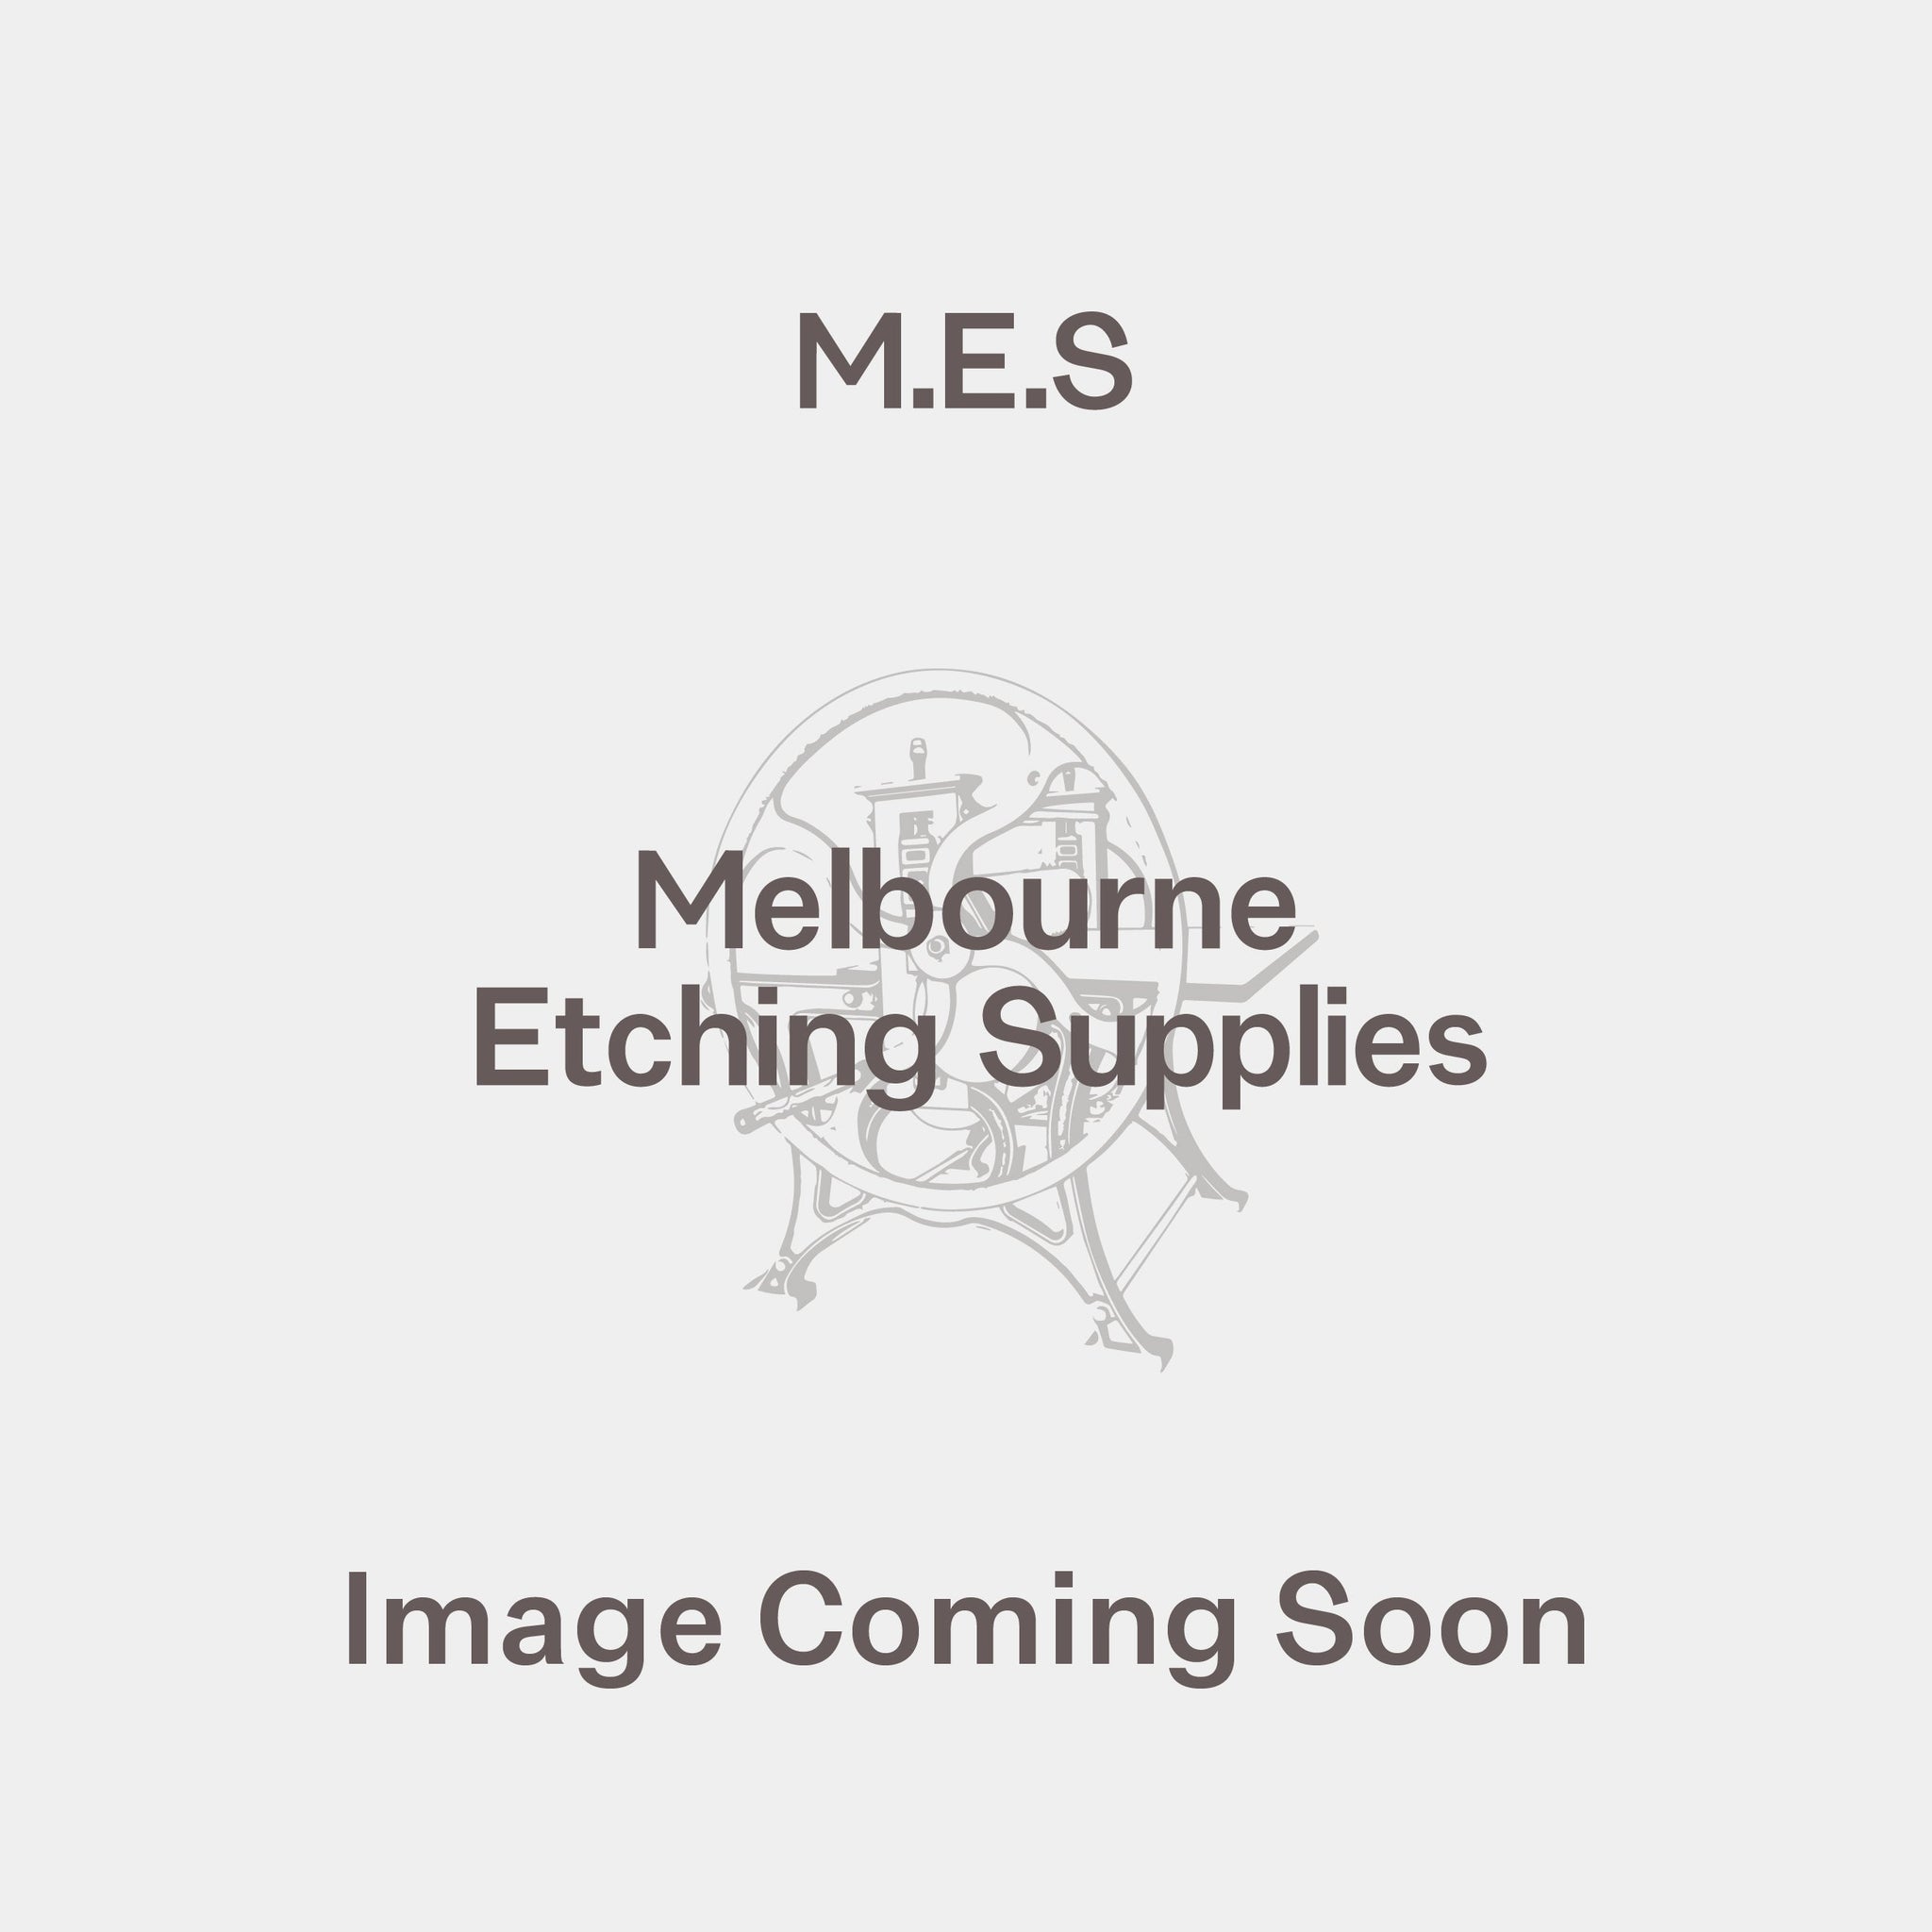 M.E.S. Relief Ink 1kg tins - Melbourne Etching Supplies